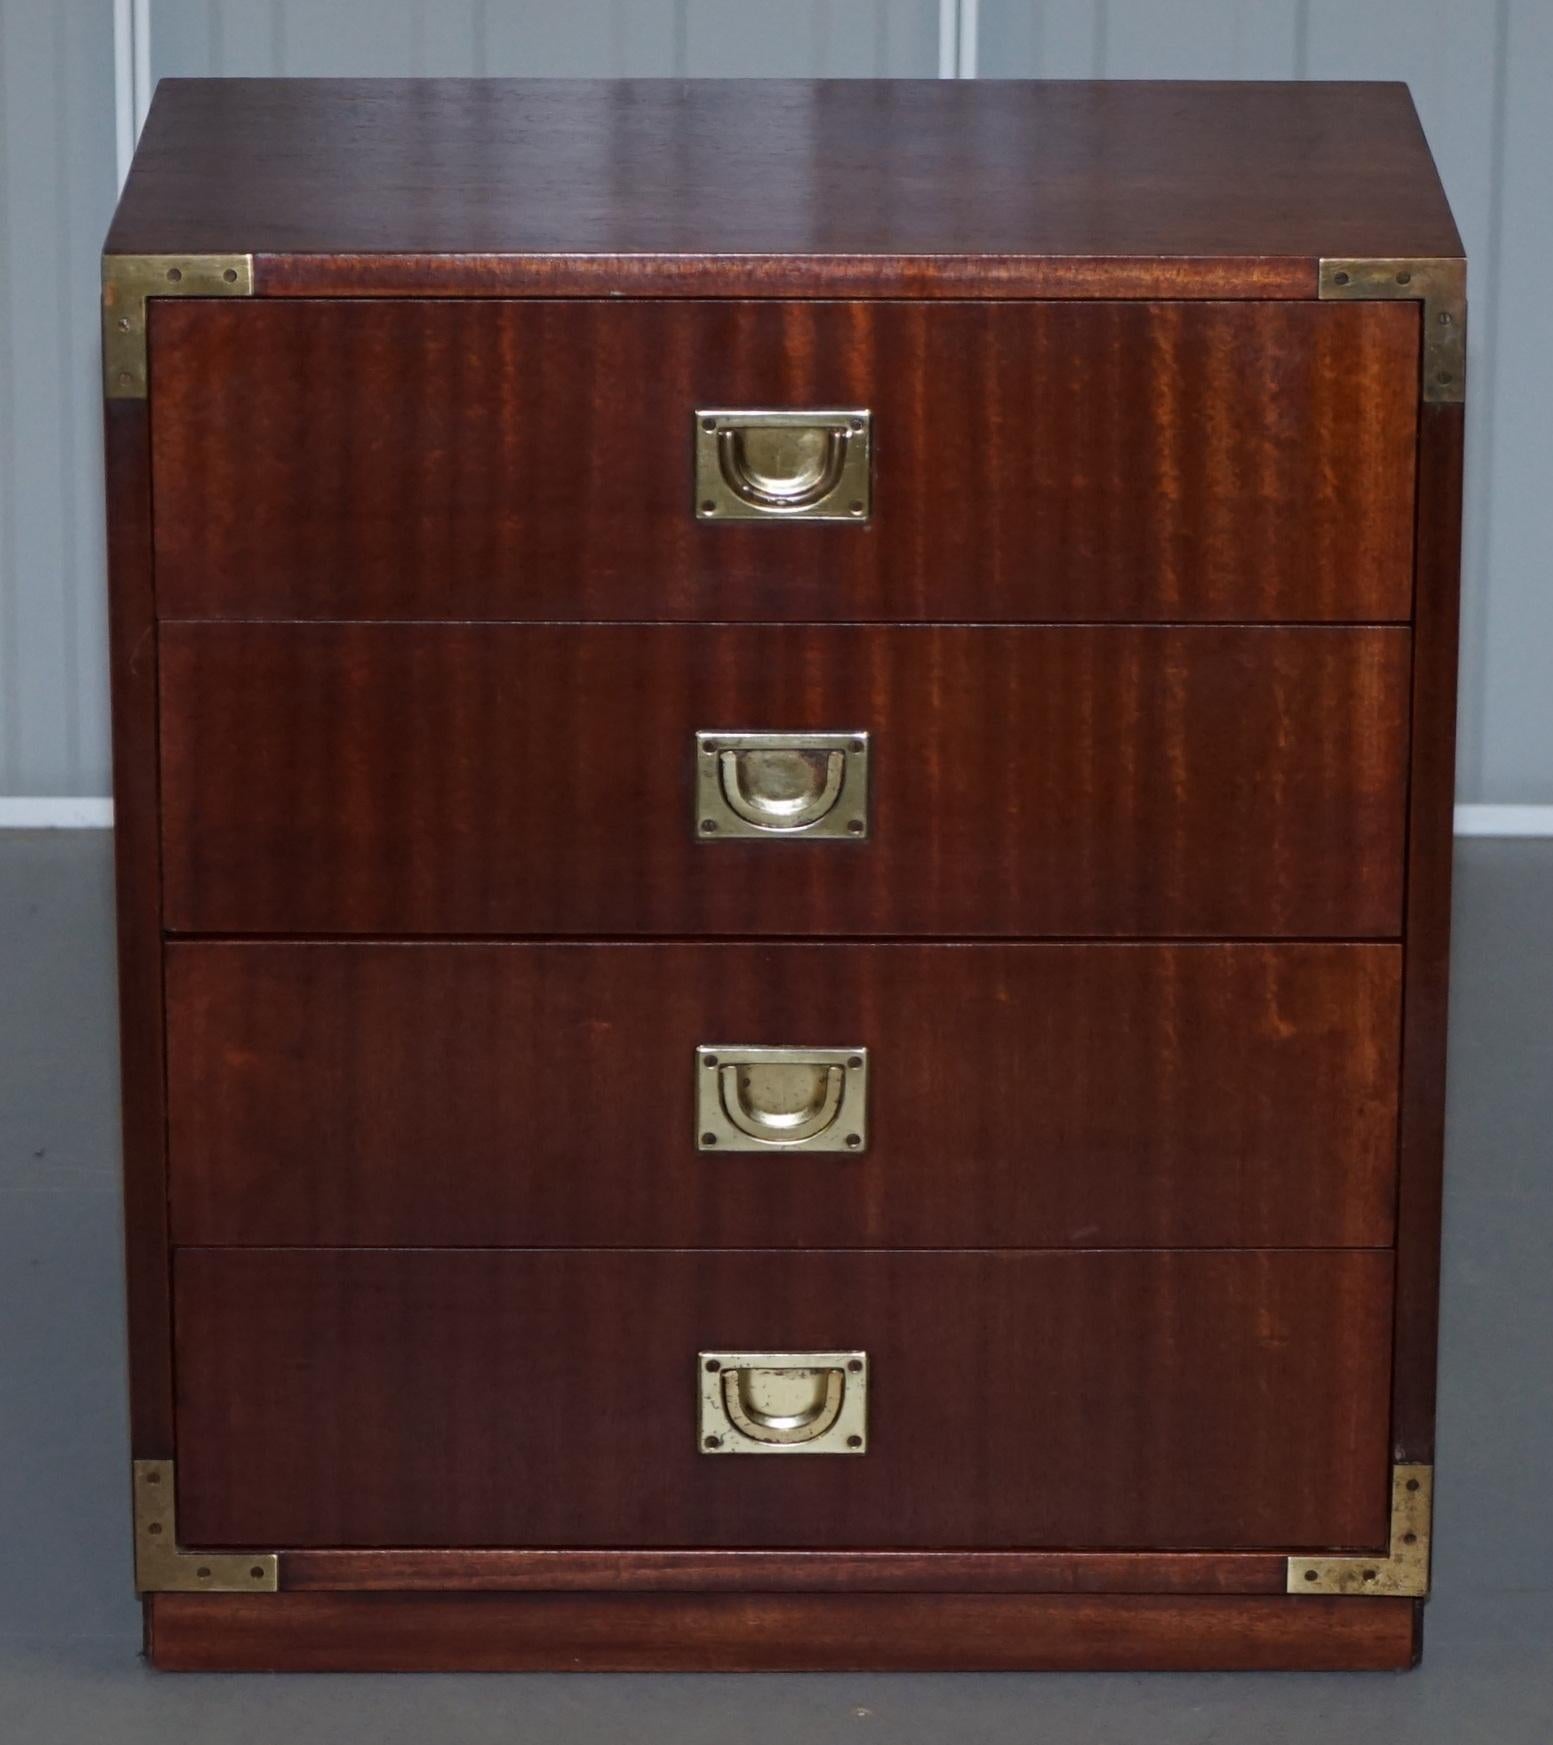 We are delighted to offer for sale this nice good sized Military Campaign style chest of drawers

These are a large side table side so great for a lamp, glass of wine and or your nick knacks

It has been cleaned waxed and polished there will be